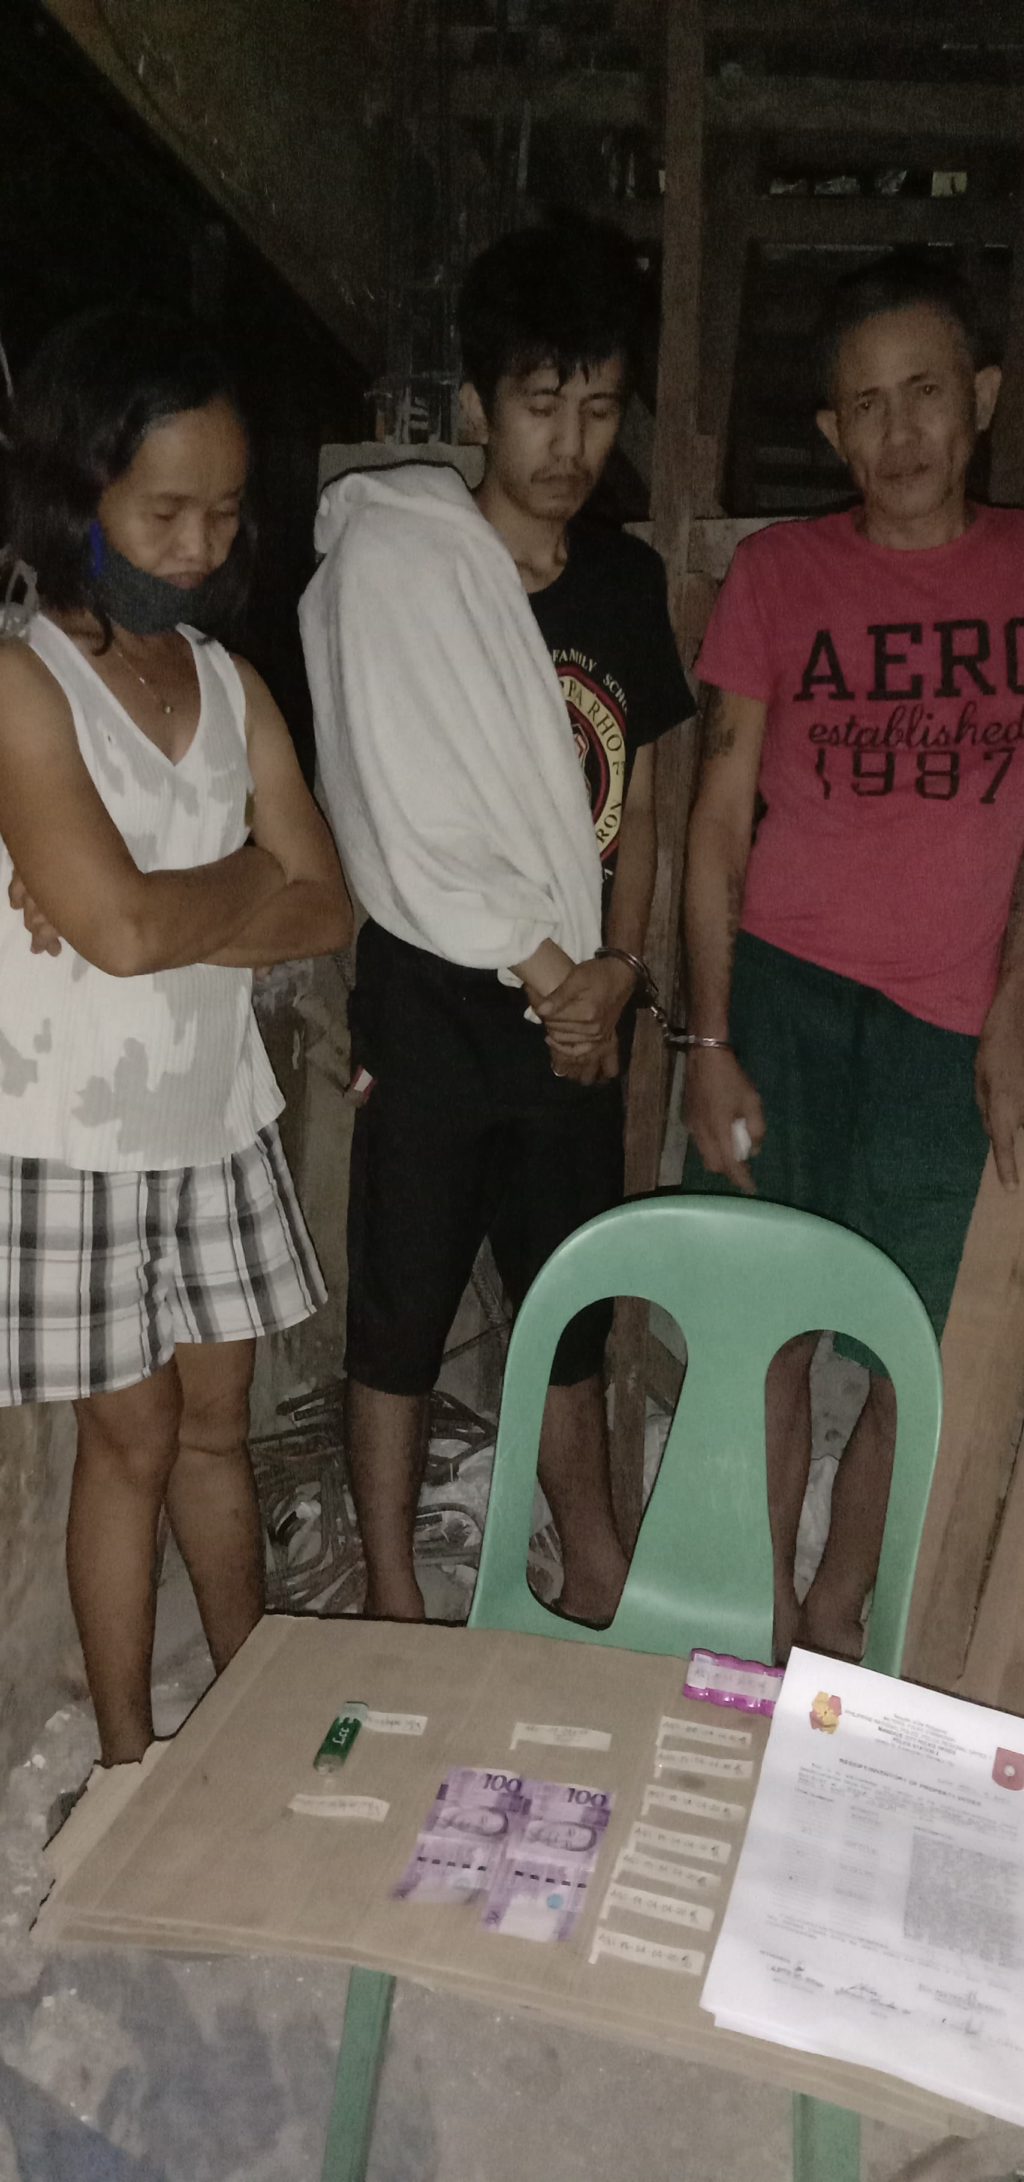 Two men and a woman are arrested after they have been caught with 8 packets of suspected shabu during a buy-bust operation at the Espina Compound in Barangay Tipolo, Mandaue City tonight, April 4, 2020.